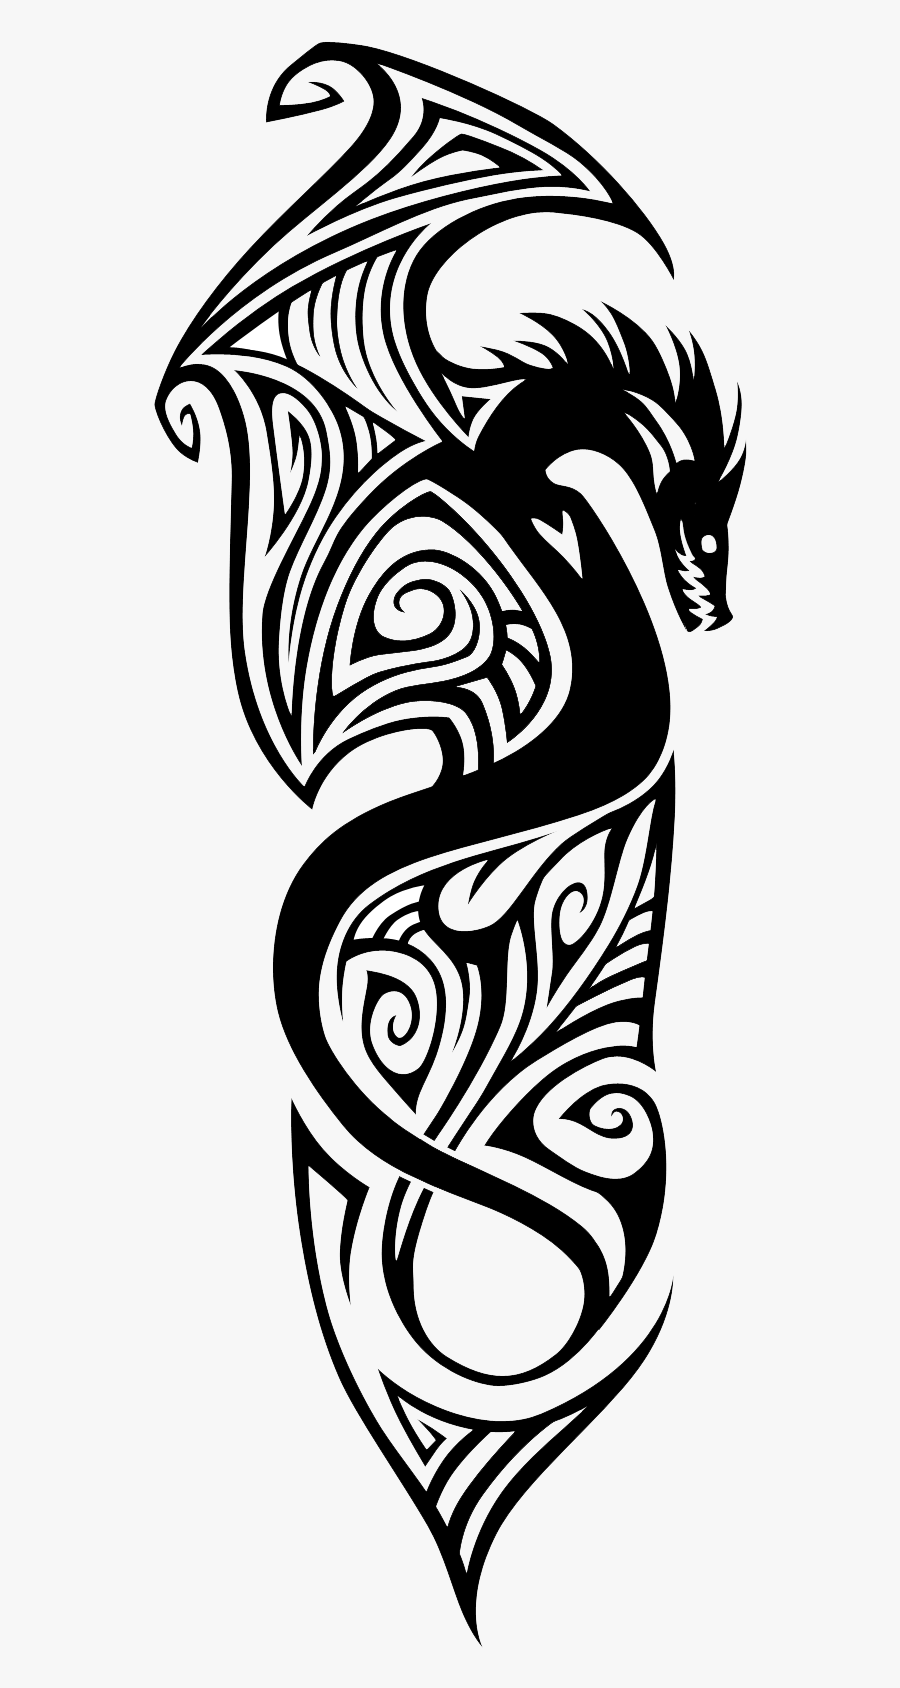 Tattoo Sleeve Polynesia Finger File Moustache Arm Clipart - Picsart Maa Tattoo Png, Transparent Clipart